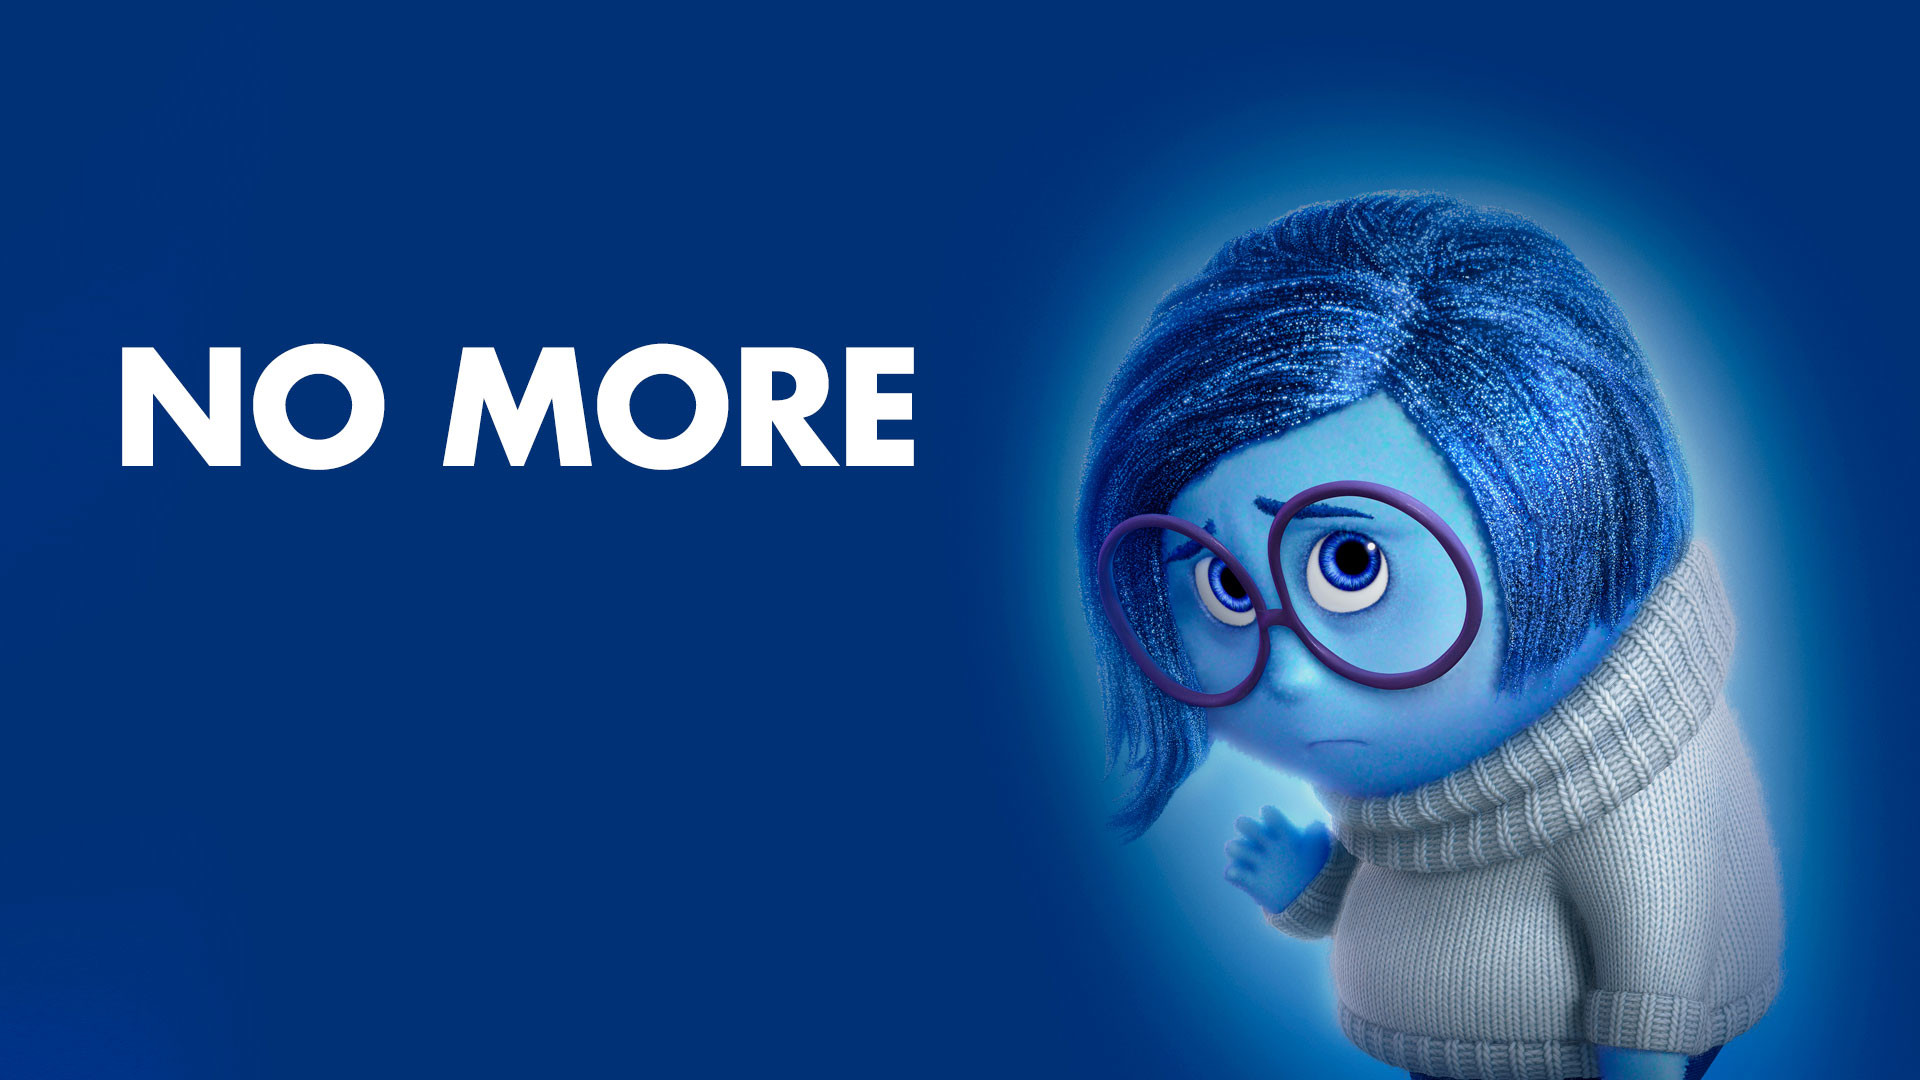 Disney Movie Inside Out 2015 Desktop Backgrounds iPhone 6 Wallpapers